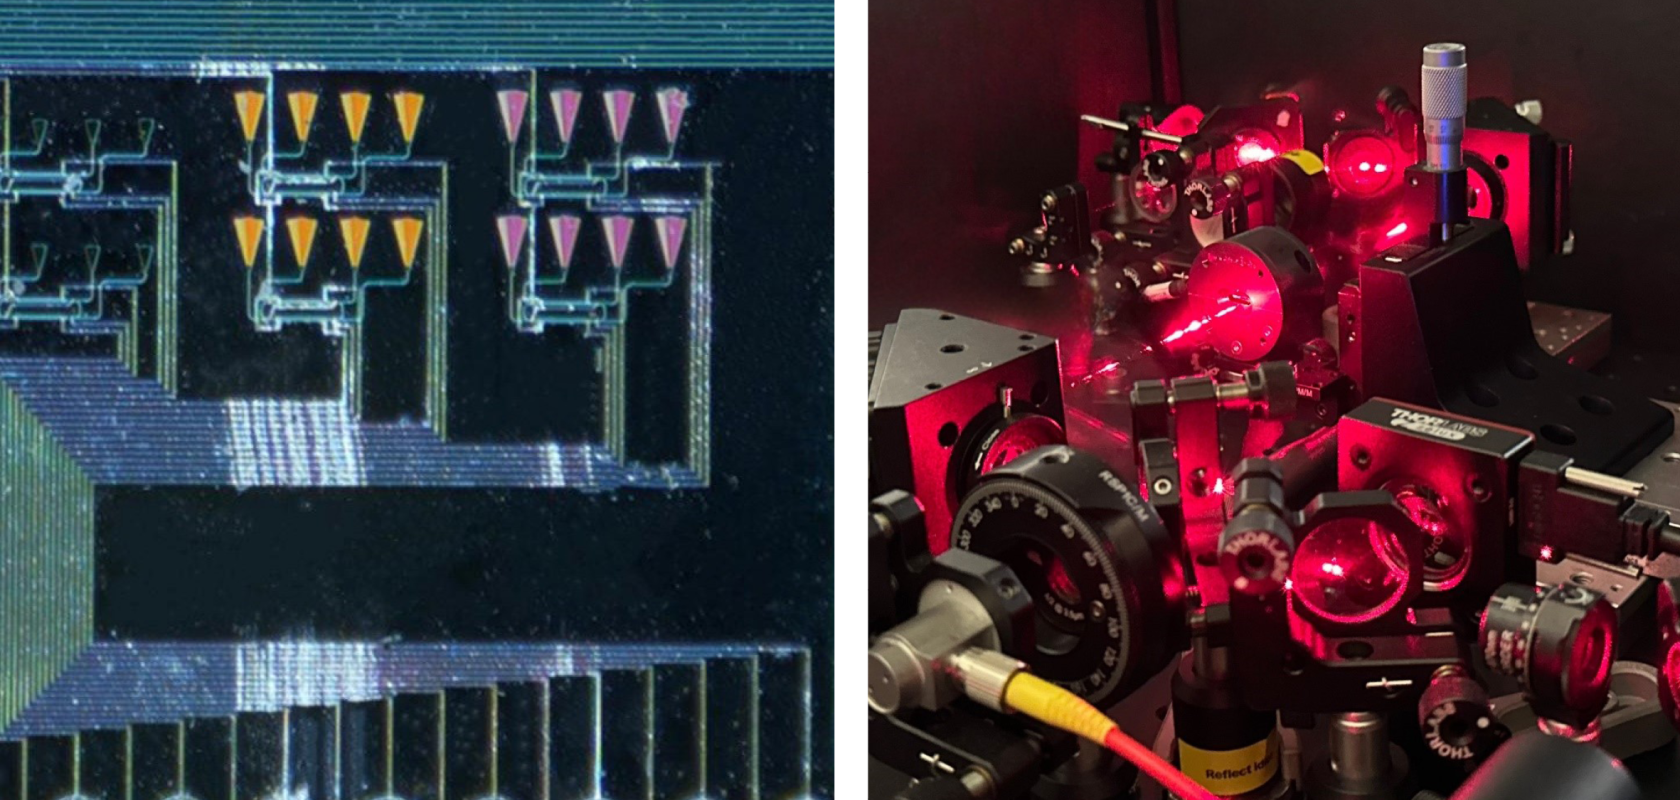 An integrated silicon photonic chip and a red laser pumped nonlinear interferometer used for methane sensing